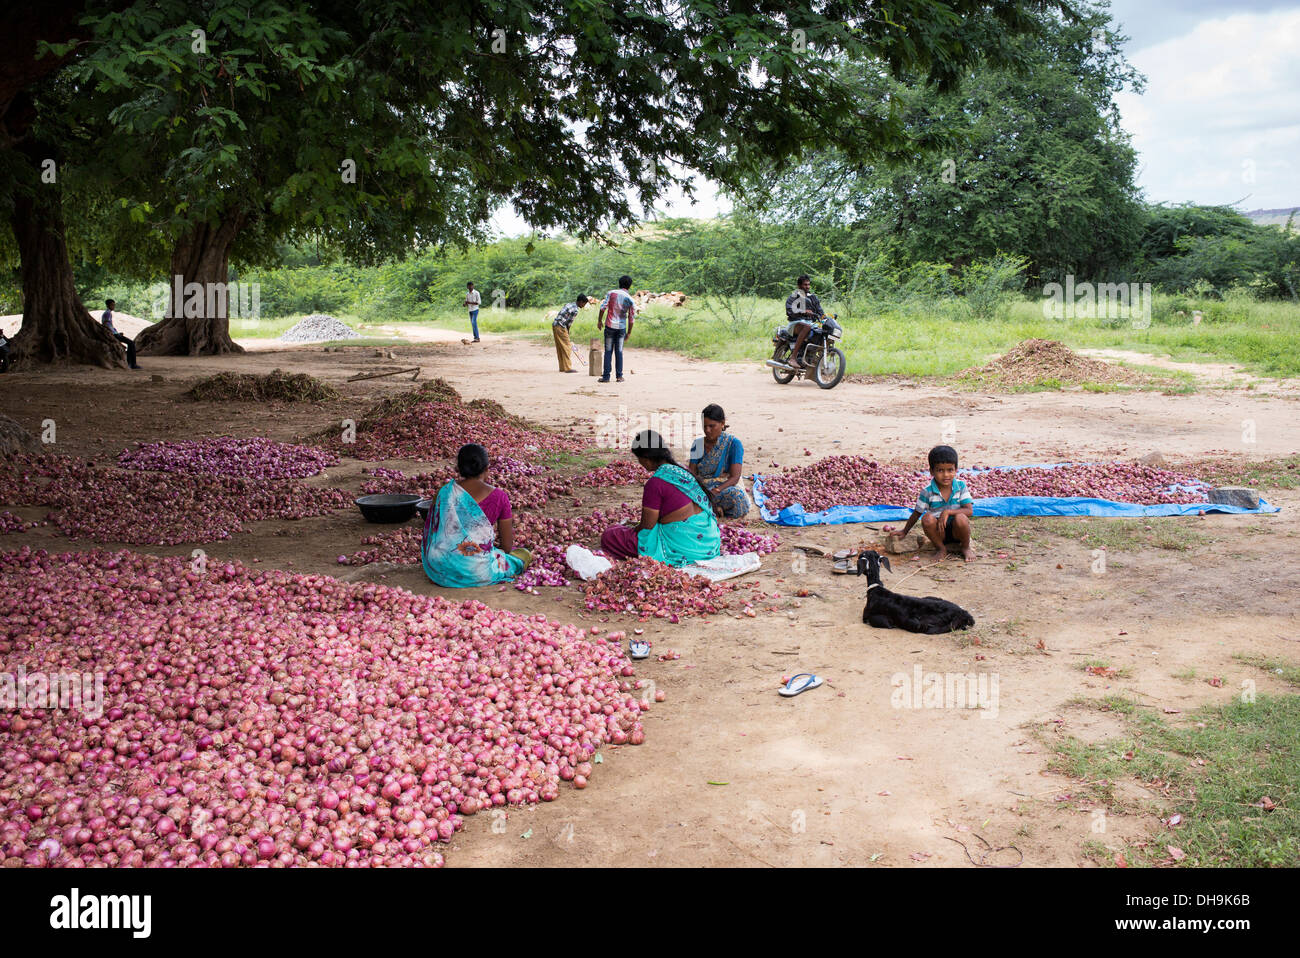 Rural Indian village women working topping and tailing harvested red onions by hand in the countryside. Andhra Pradesh. India Stock Photo